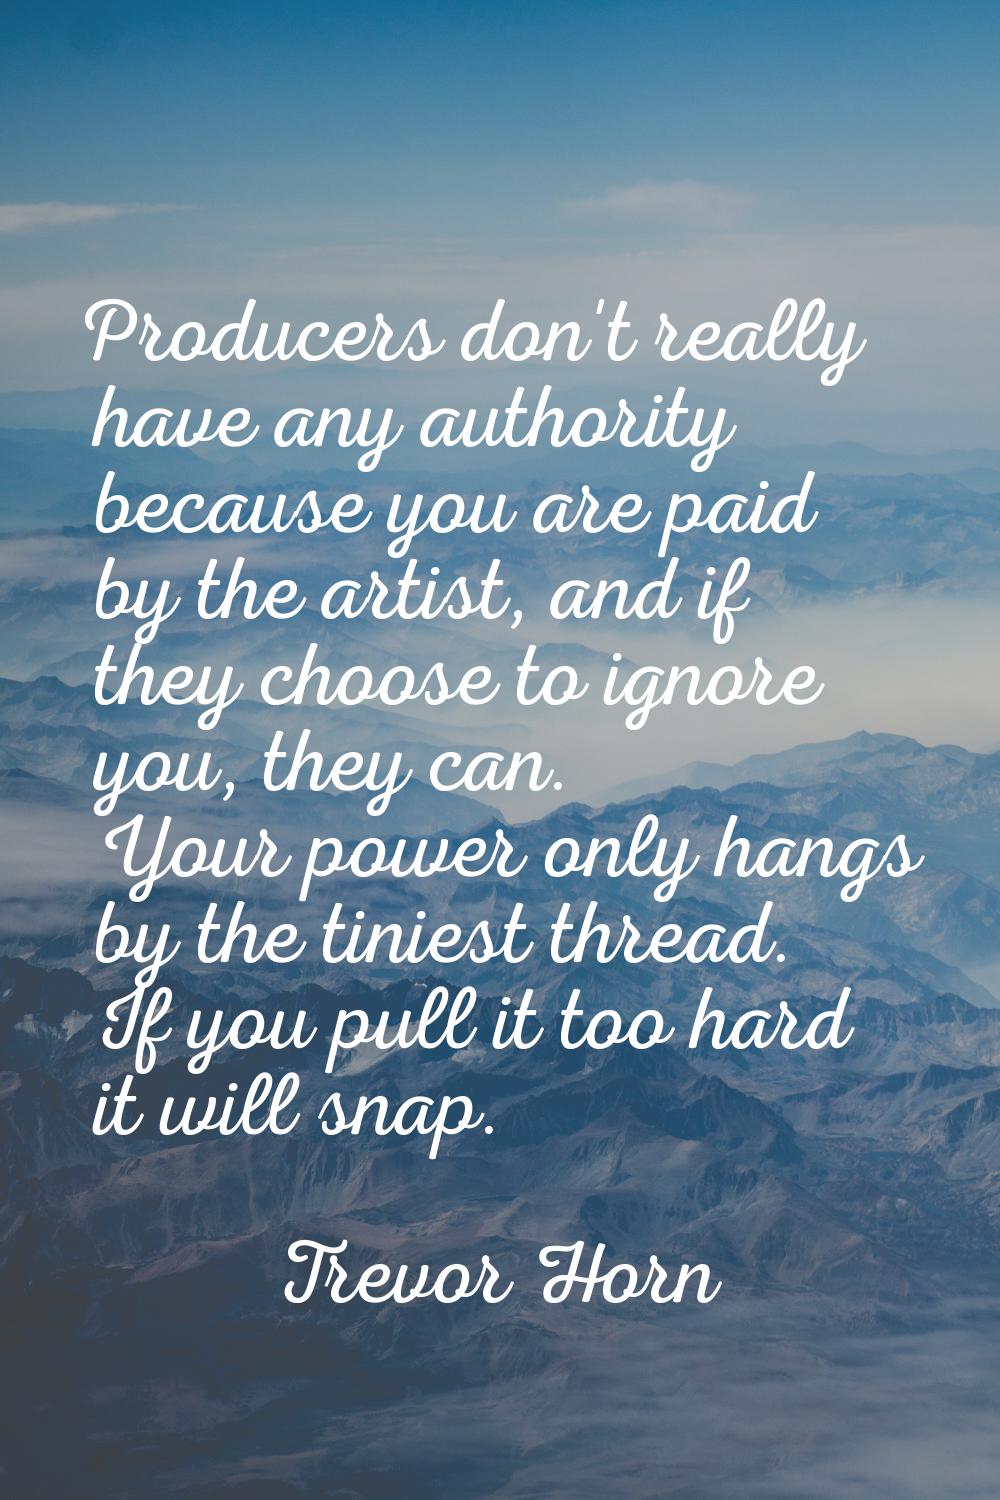 Producers don't really have any authority because you are paid by the artist, and if they choose to